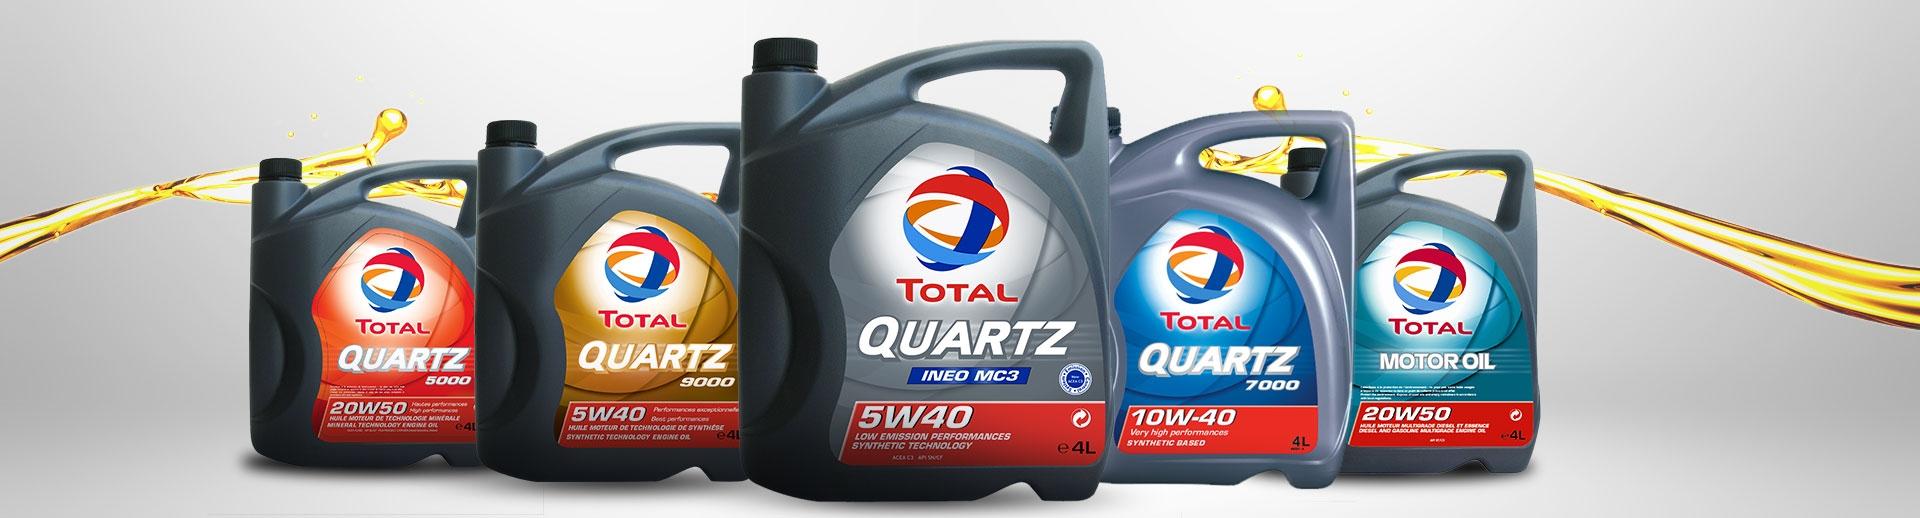 Total Lubricants | Egypt
